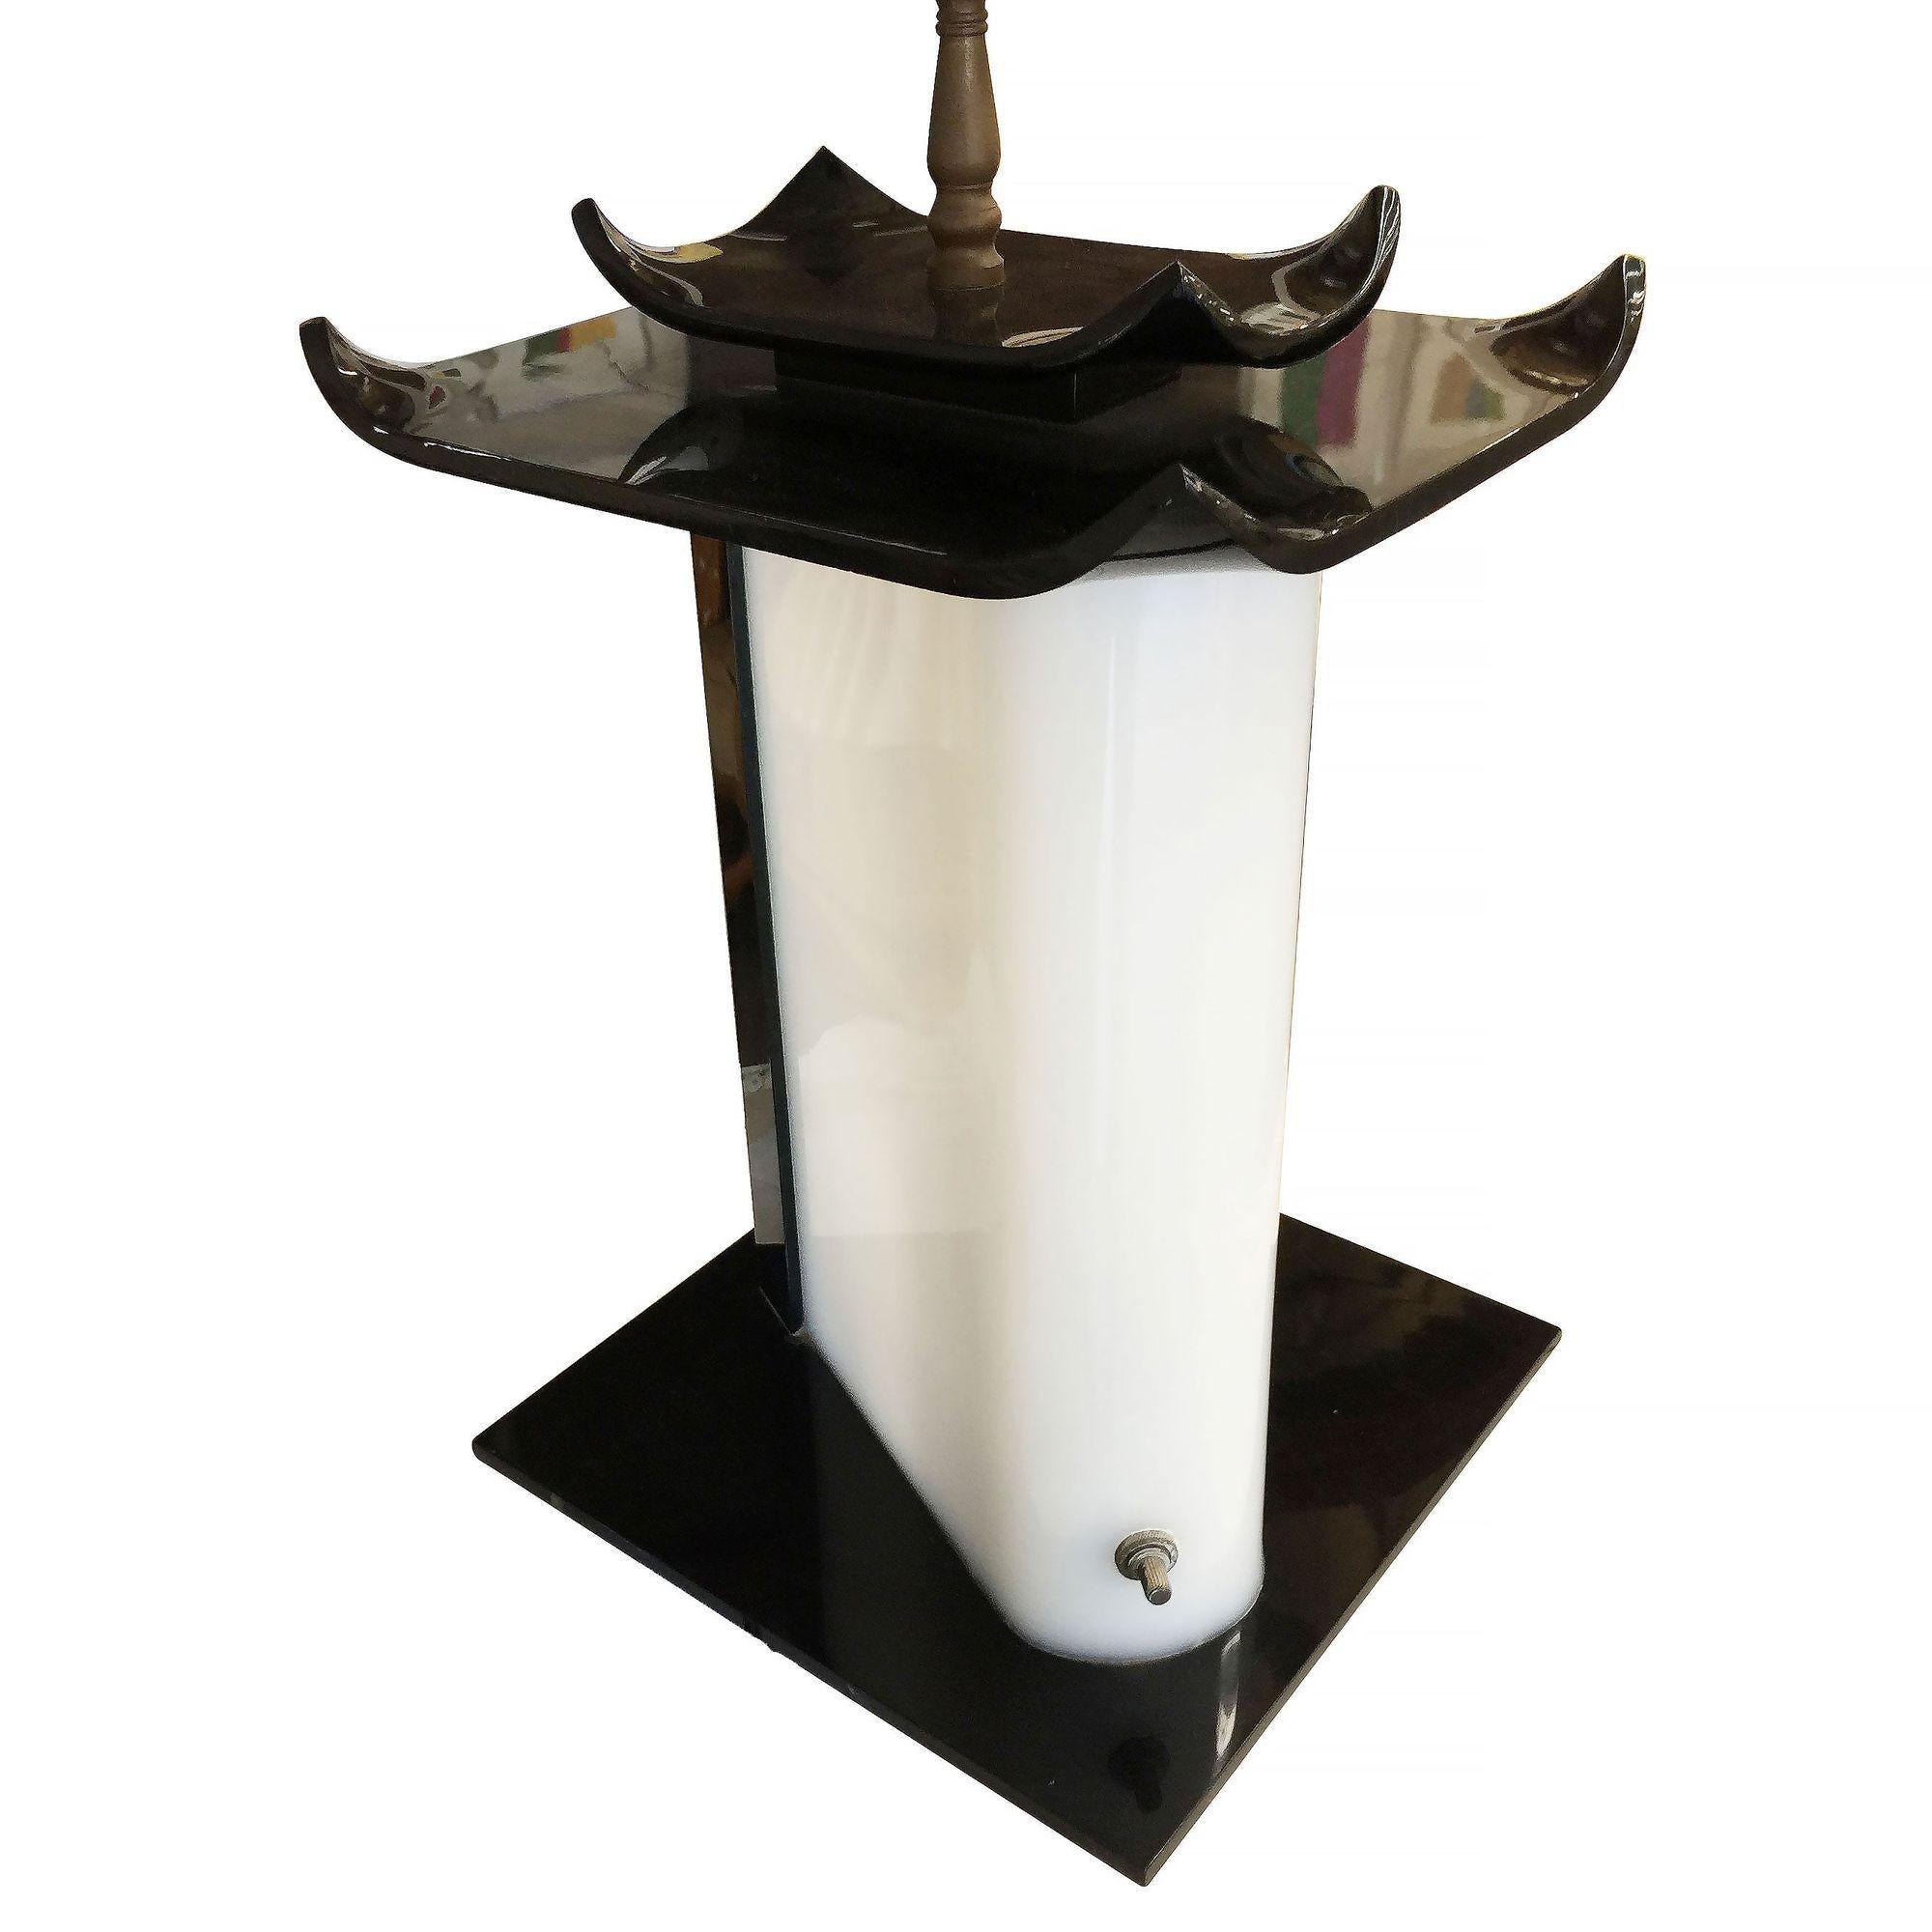 American Midcentury Arabian Inspired Lucite Sculptural Lamp by Moss For Sale